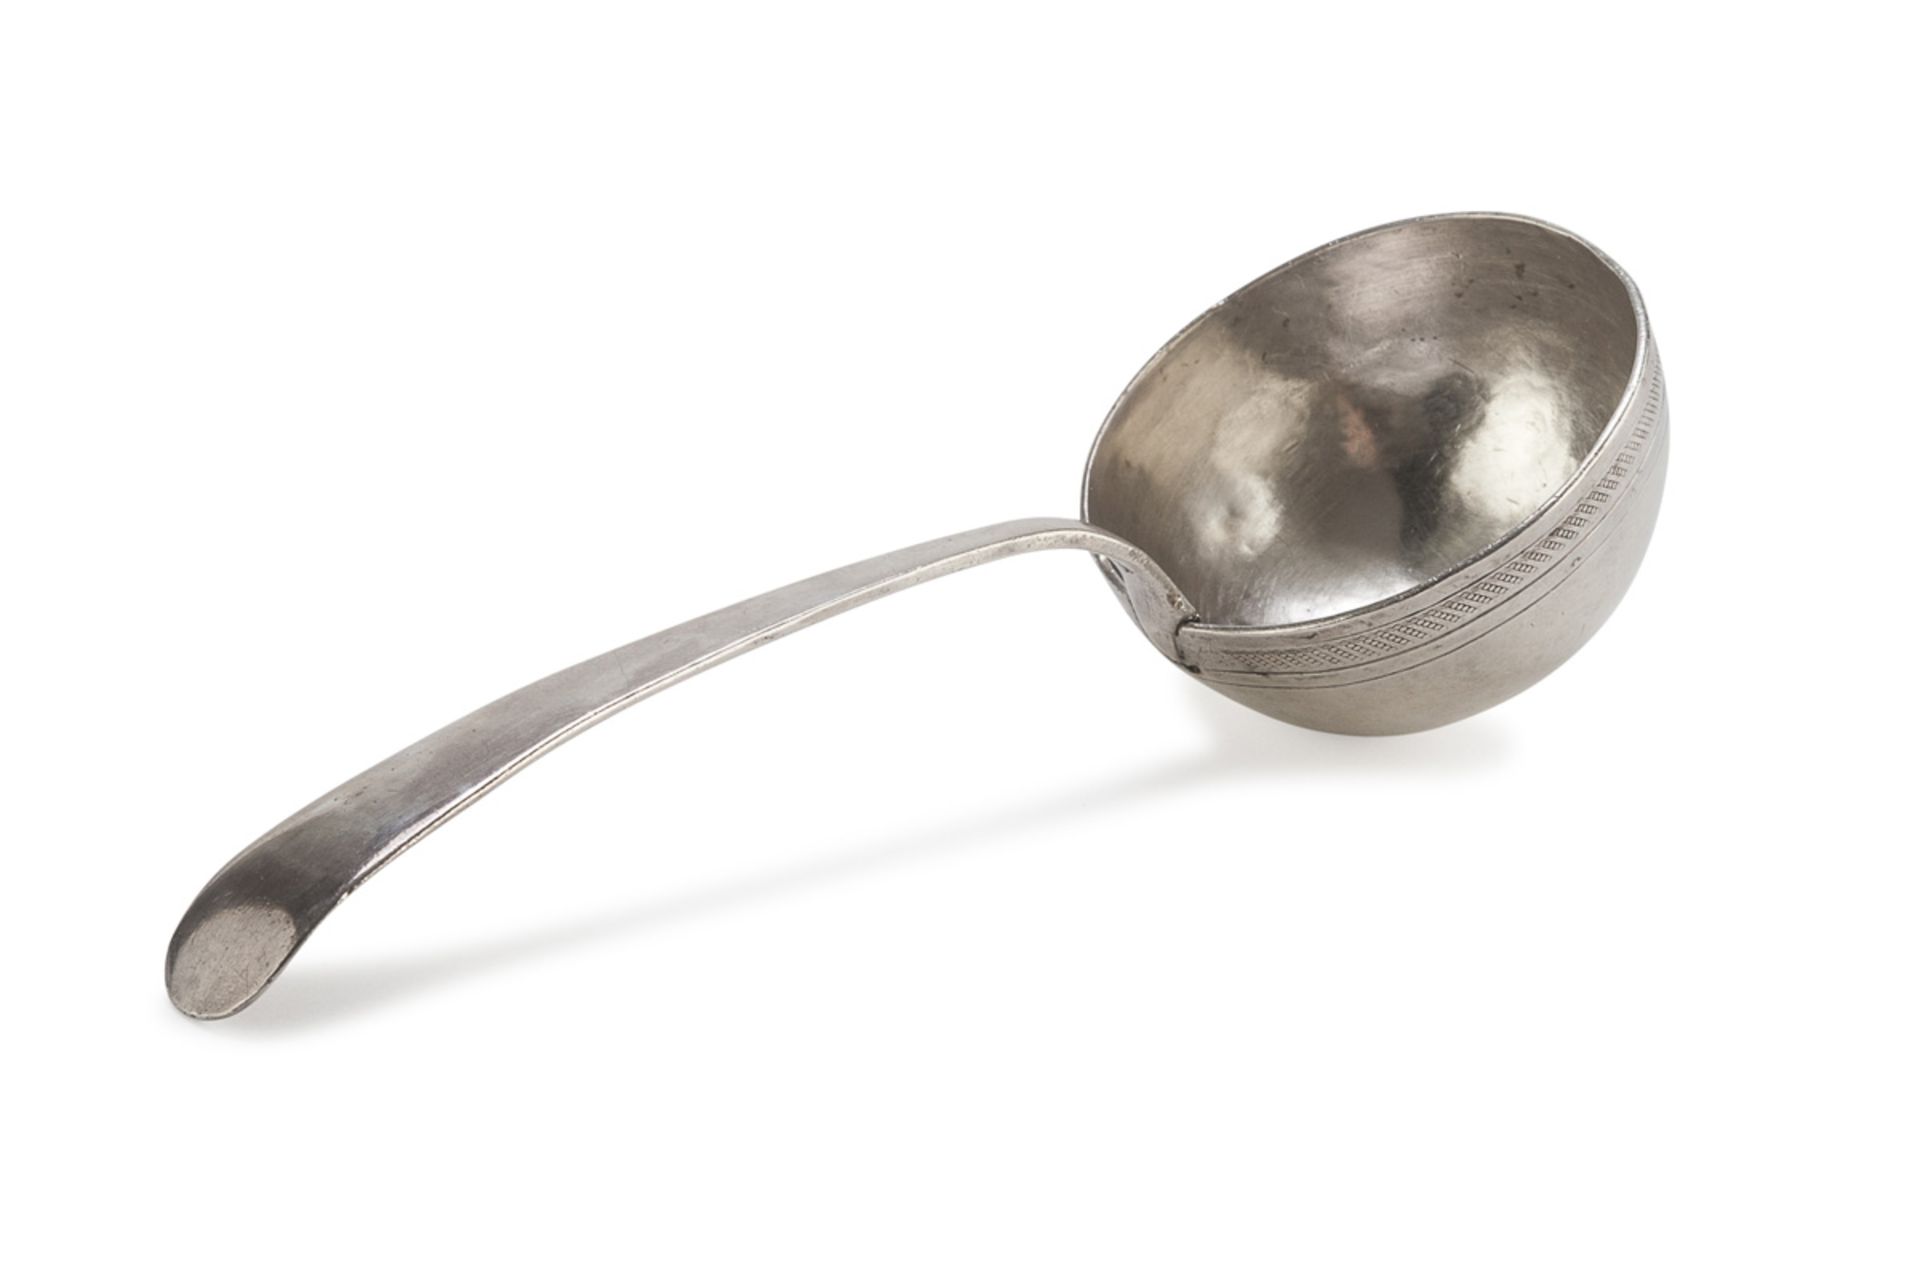 SMALL LADLE IN SILVER PUNCH NAPLES 1832/1872